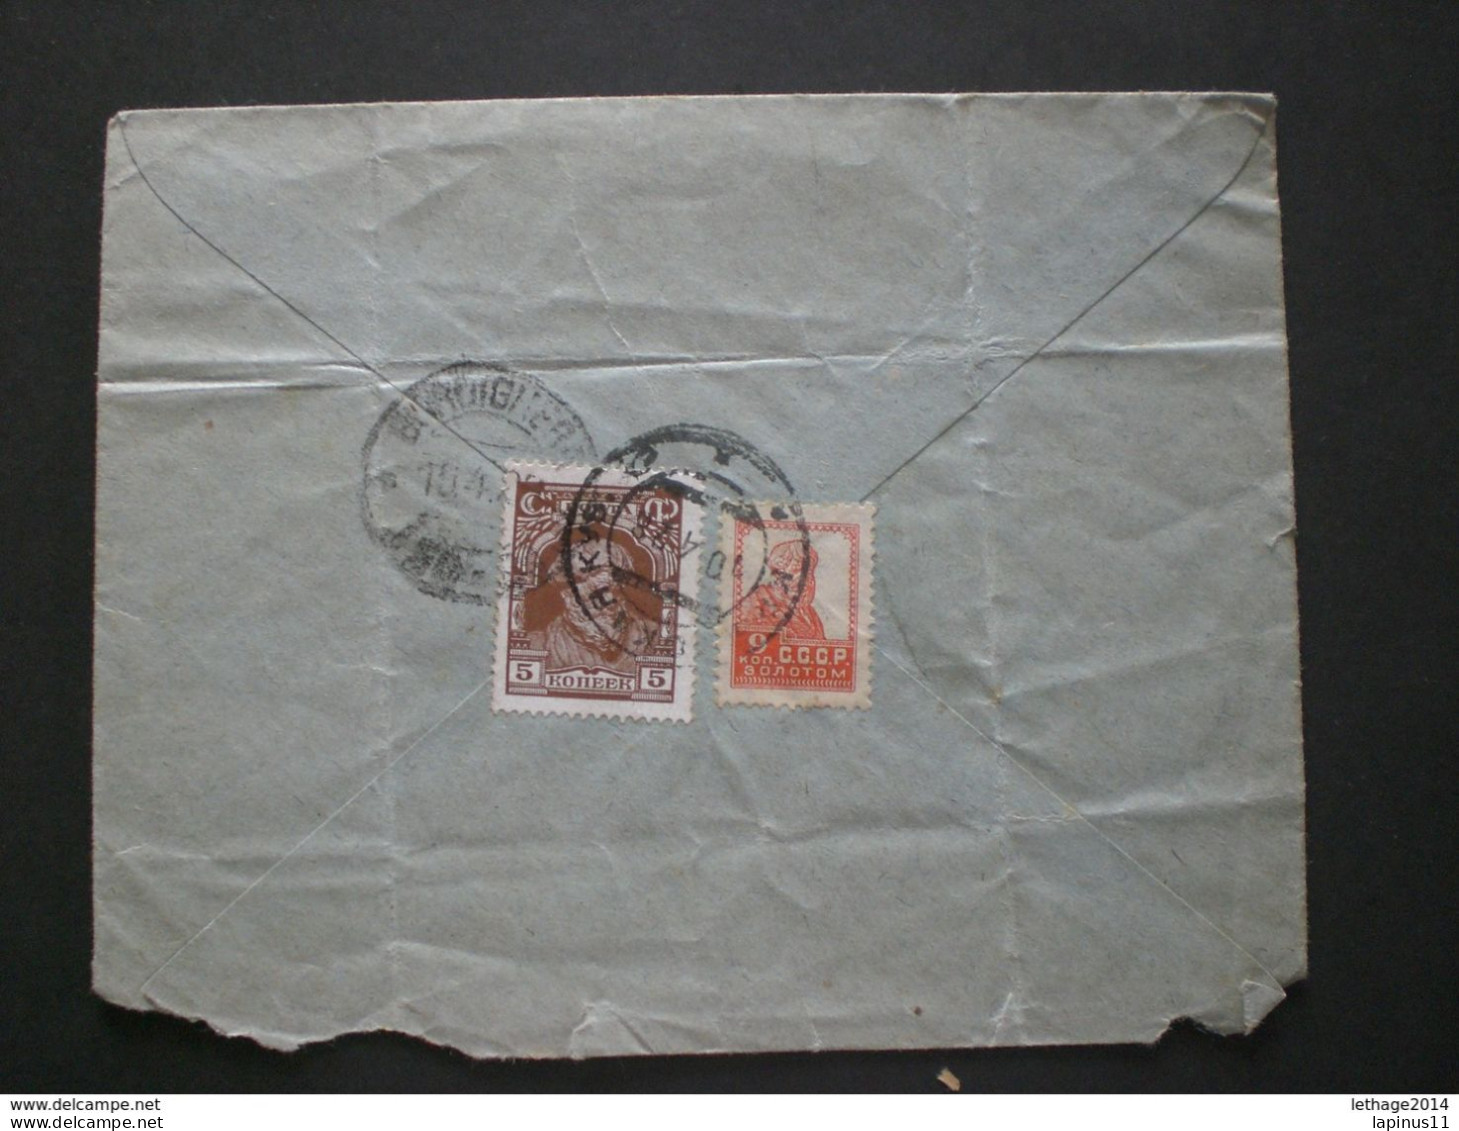 RUSSIA RUSSIE РОССИЯ STAMPS COVER 1928 RUSSLAND TO ITALY RRR RIF. TAGG (175) - Lettres & Documents